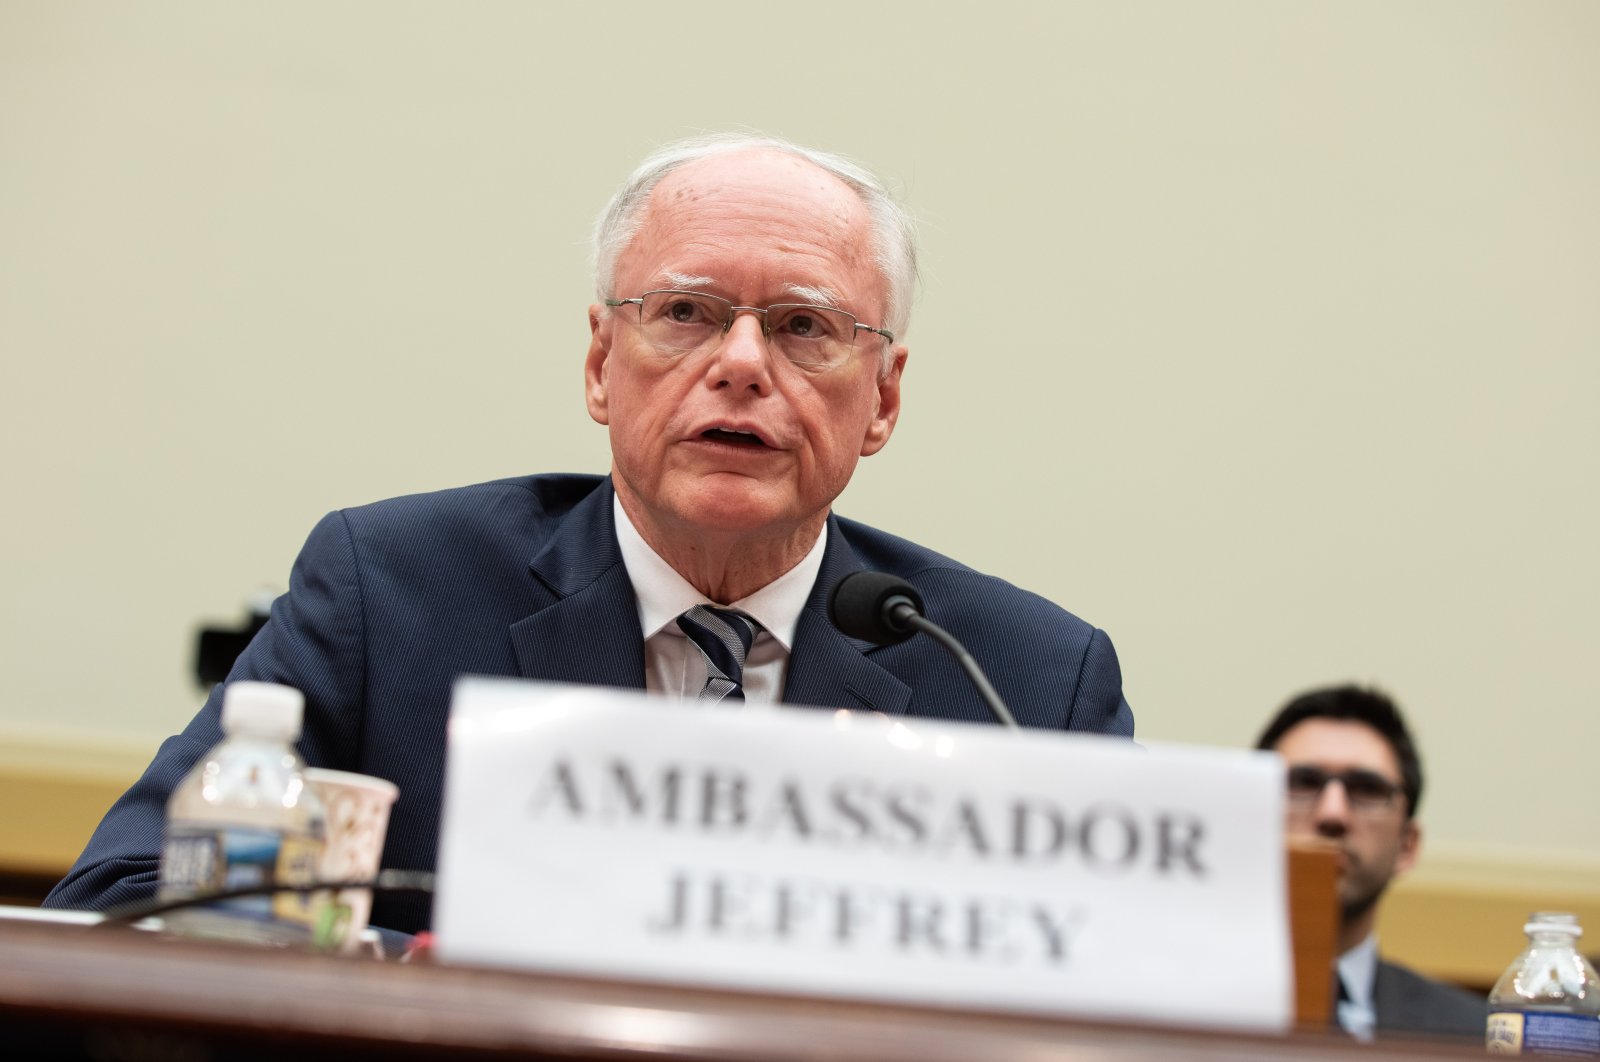 U.S. Special Envoy for Syria James Jeffery answers questions before the U.S. House Foreign Affairs Committee, May 22, 2019. (AA Photo)